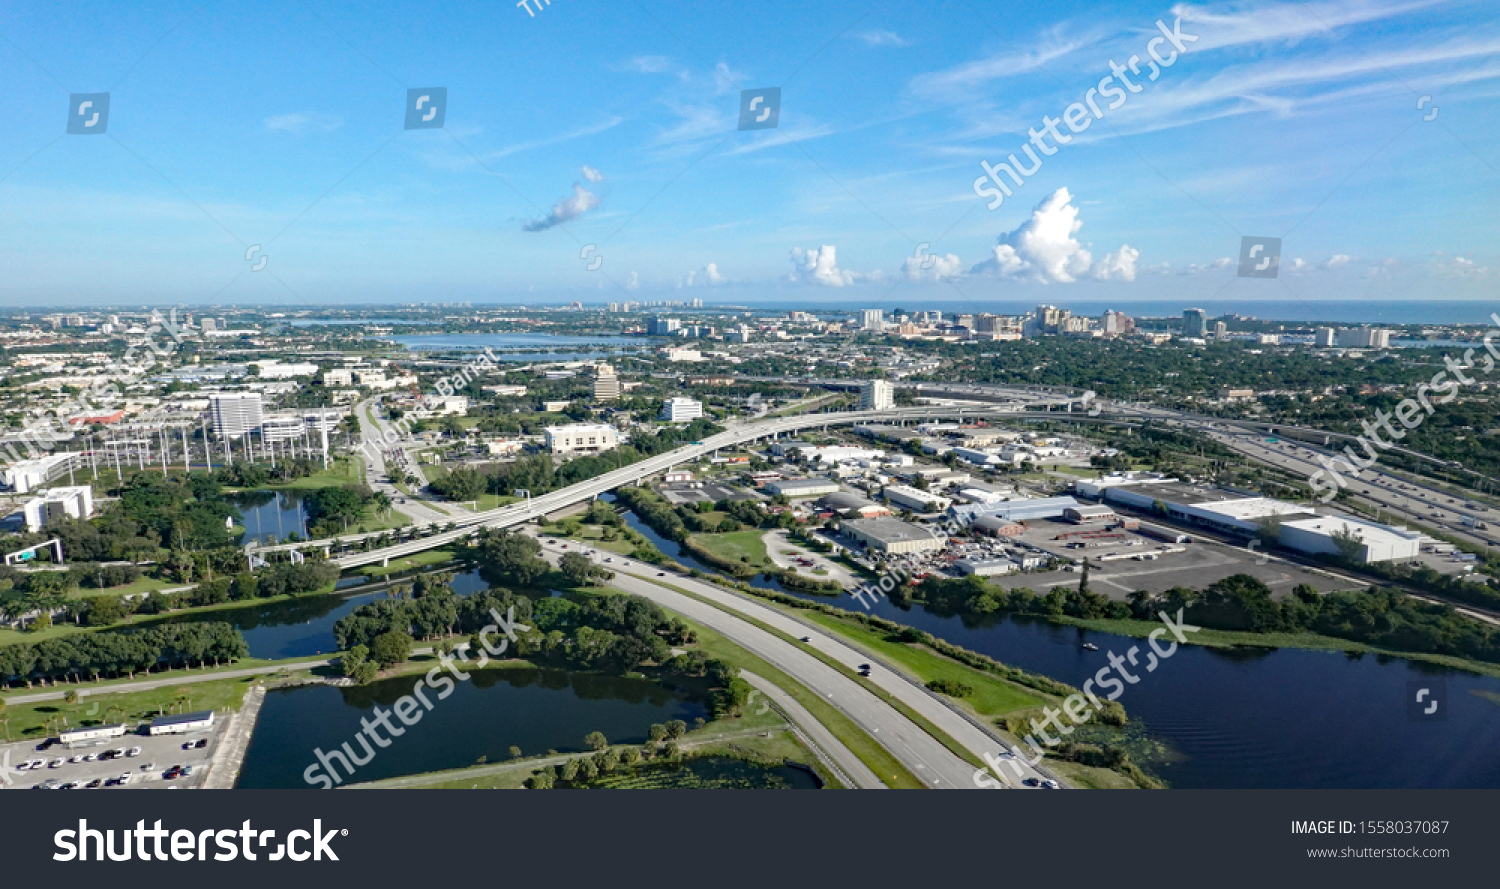 Aerial view of West Palm Beach, Florida, with Interstate Highway I-95. #1558037087